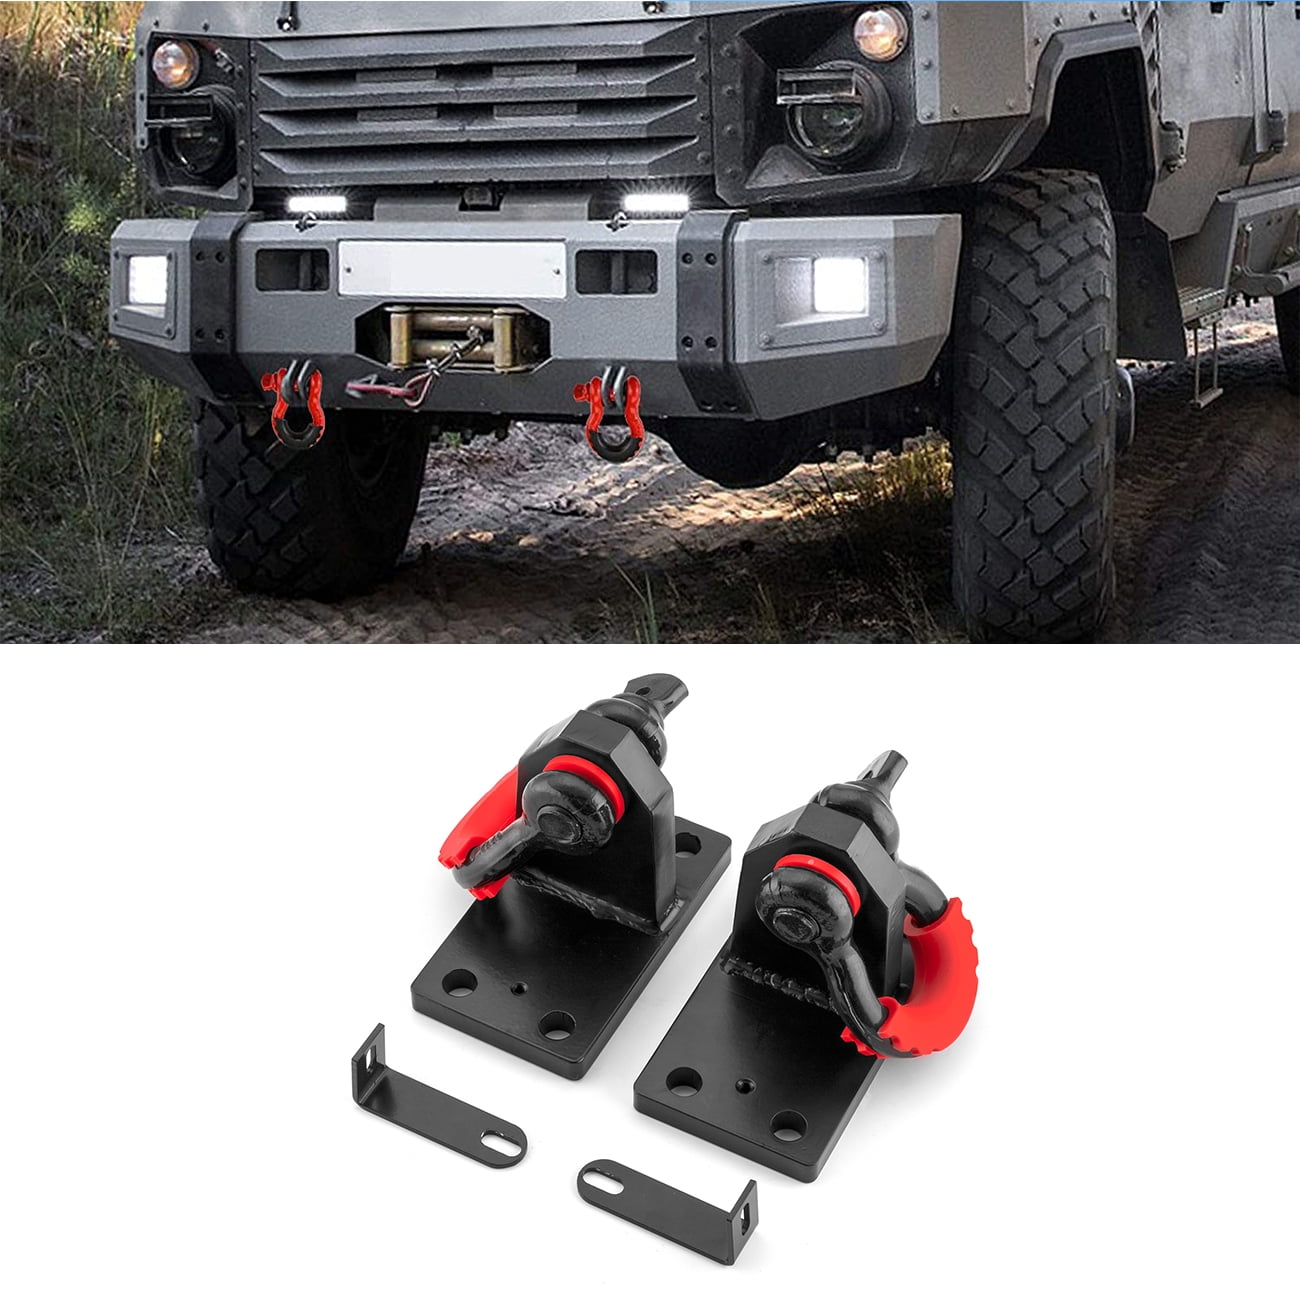 CNSY Heavy Duty Front Shackle Tow Hooks Short Size Fit for Dodge Ram 2500/3500 2010-2018 